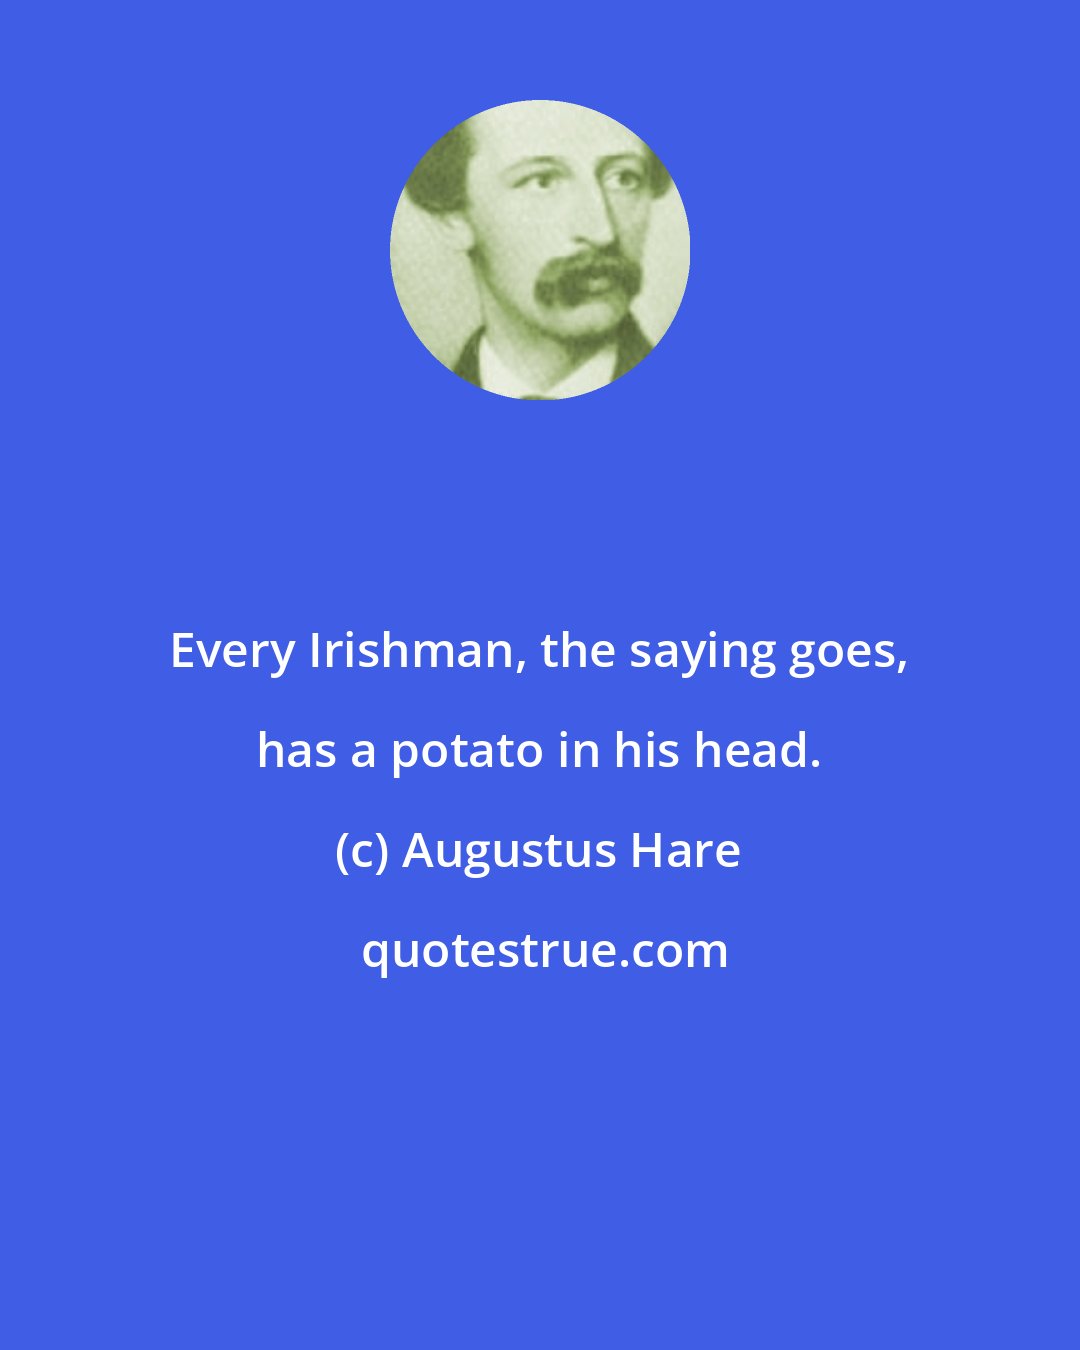 Augustus Hare: Every Irishman, the saying goes, has a potato in his head.